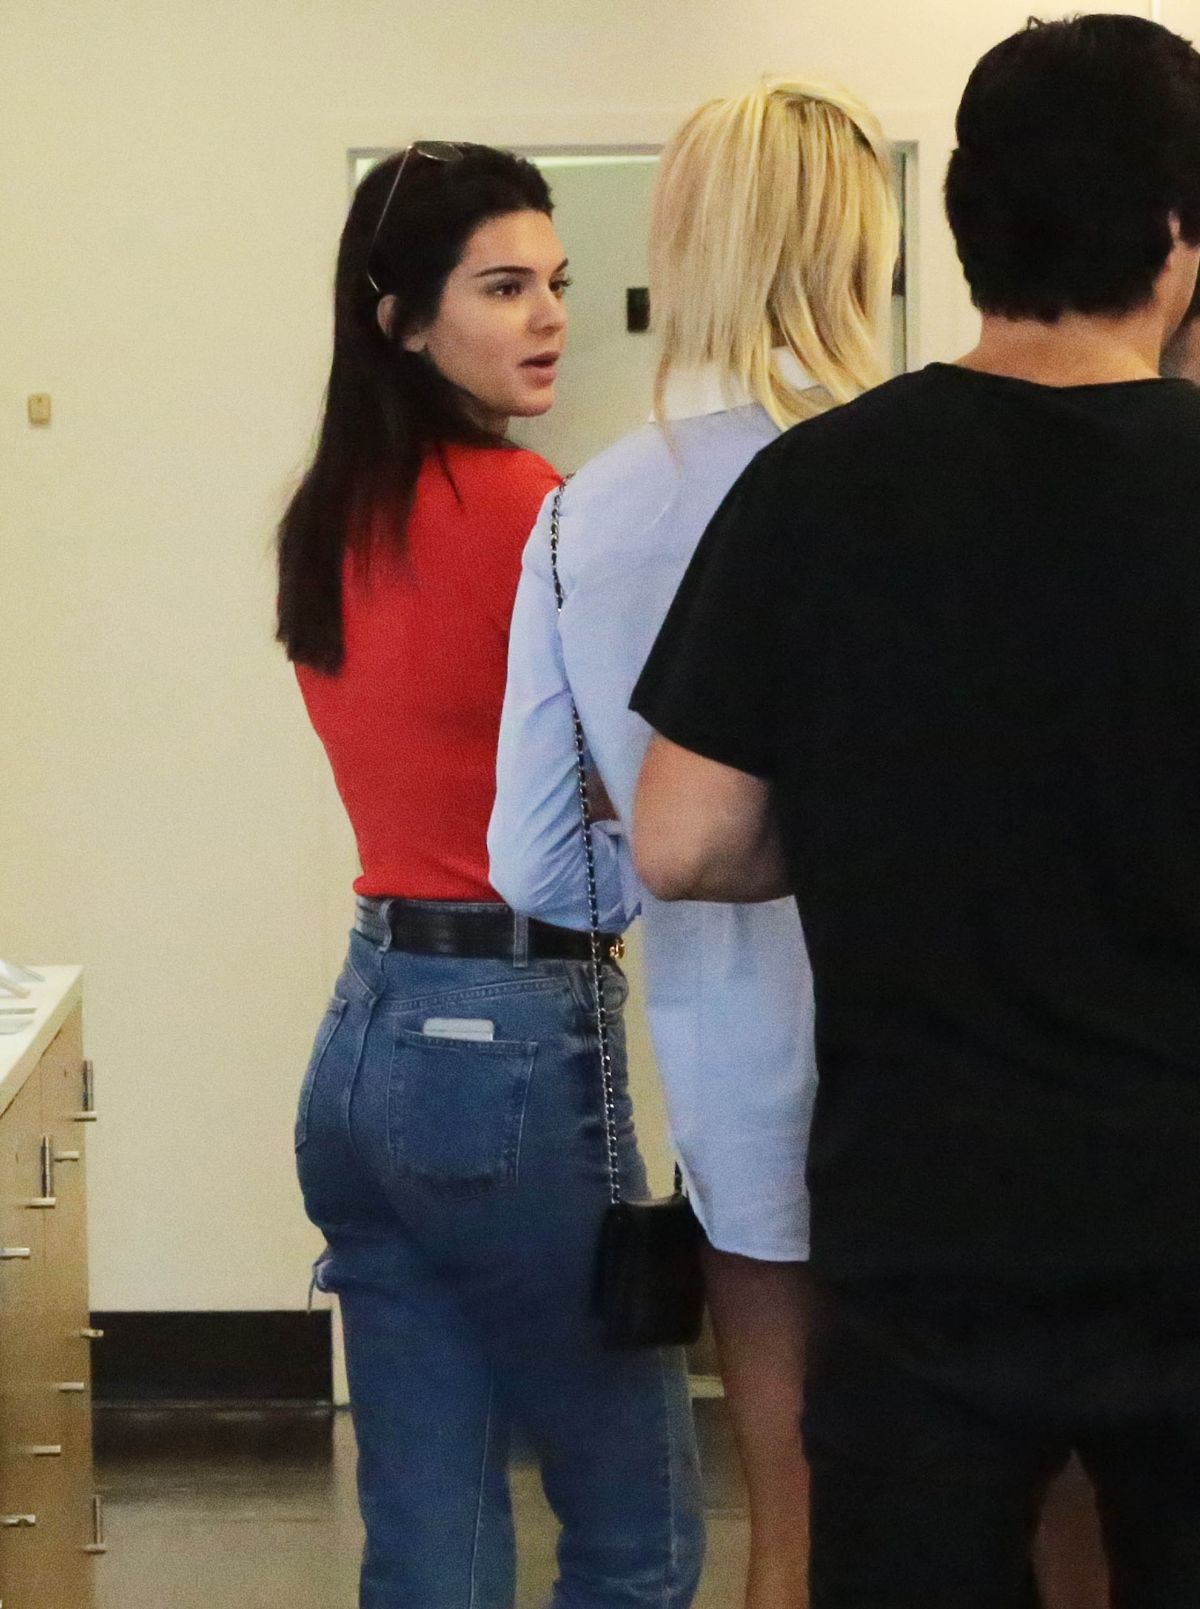 kendall-jenner-in-tight-jeans-out-in-new-york-09-02-2015_12.jpg